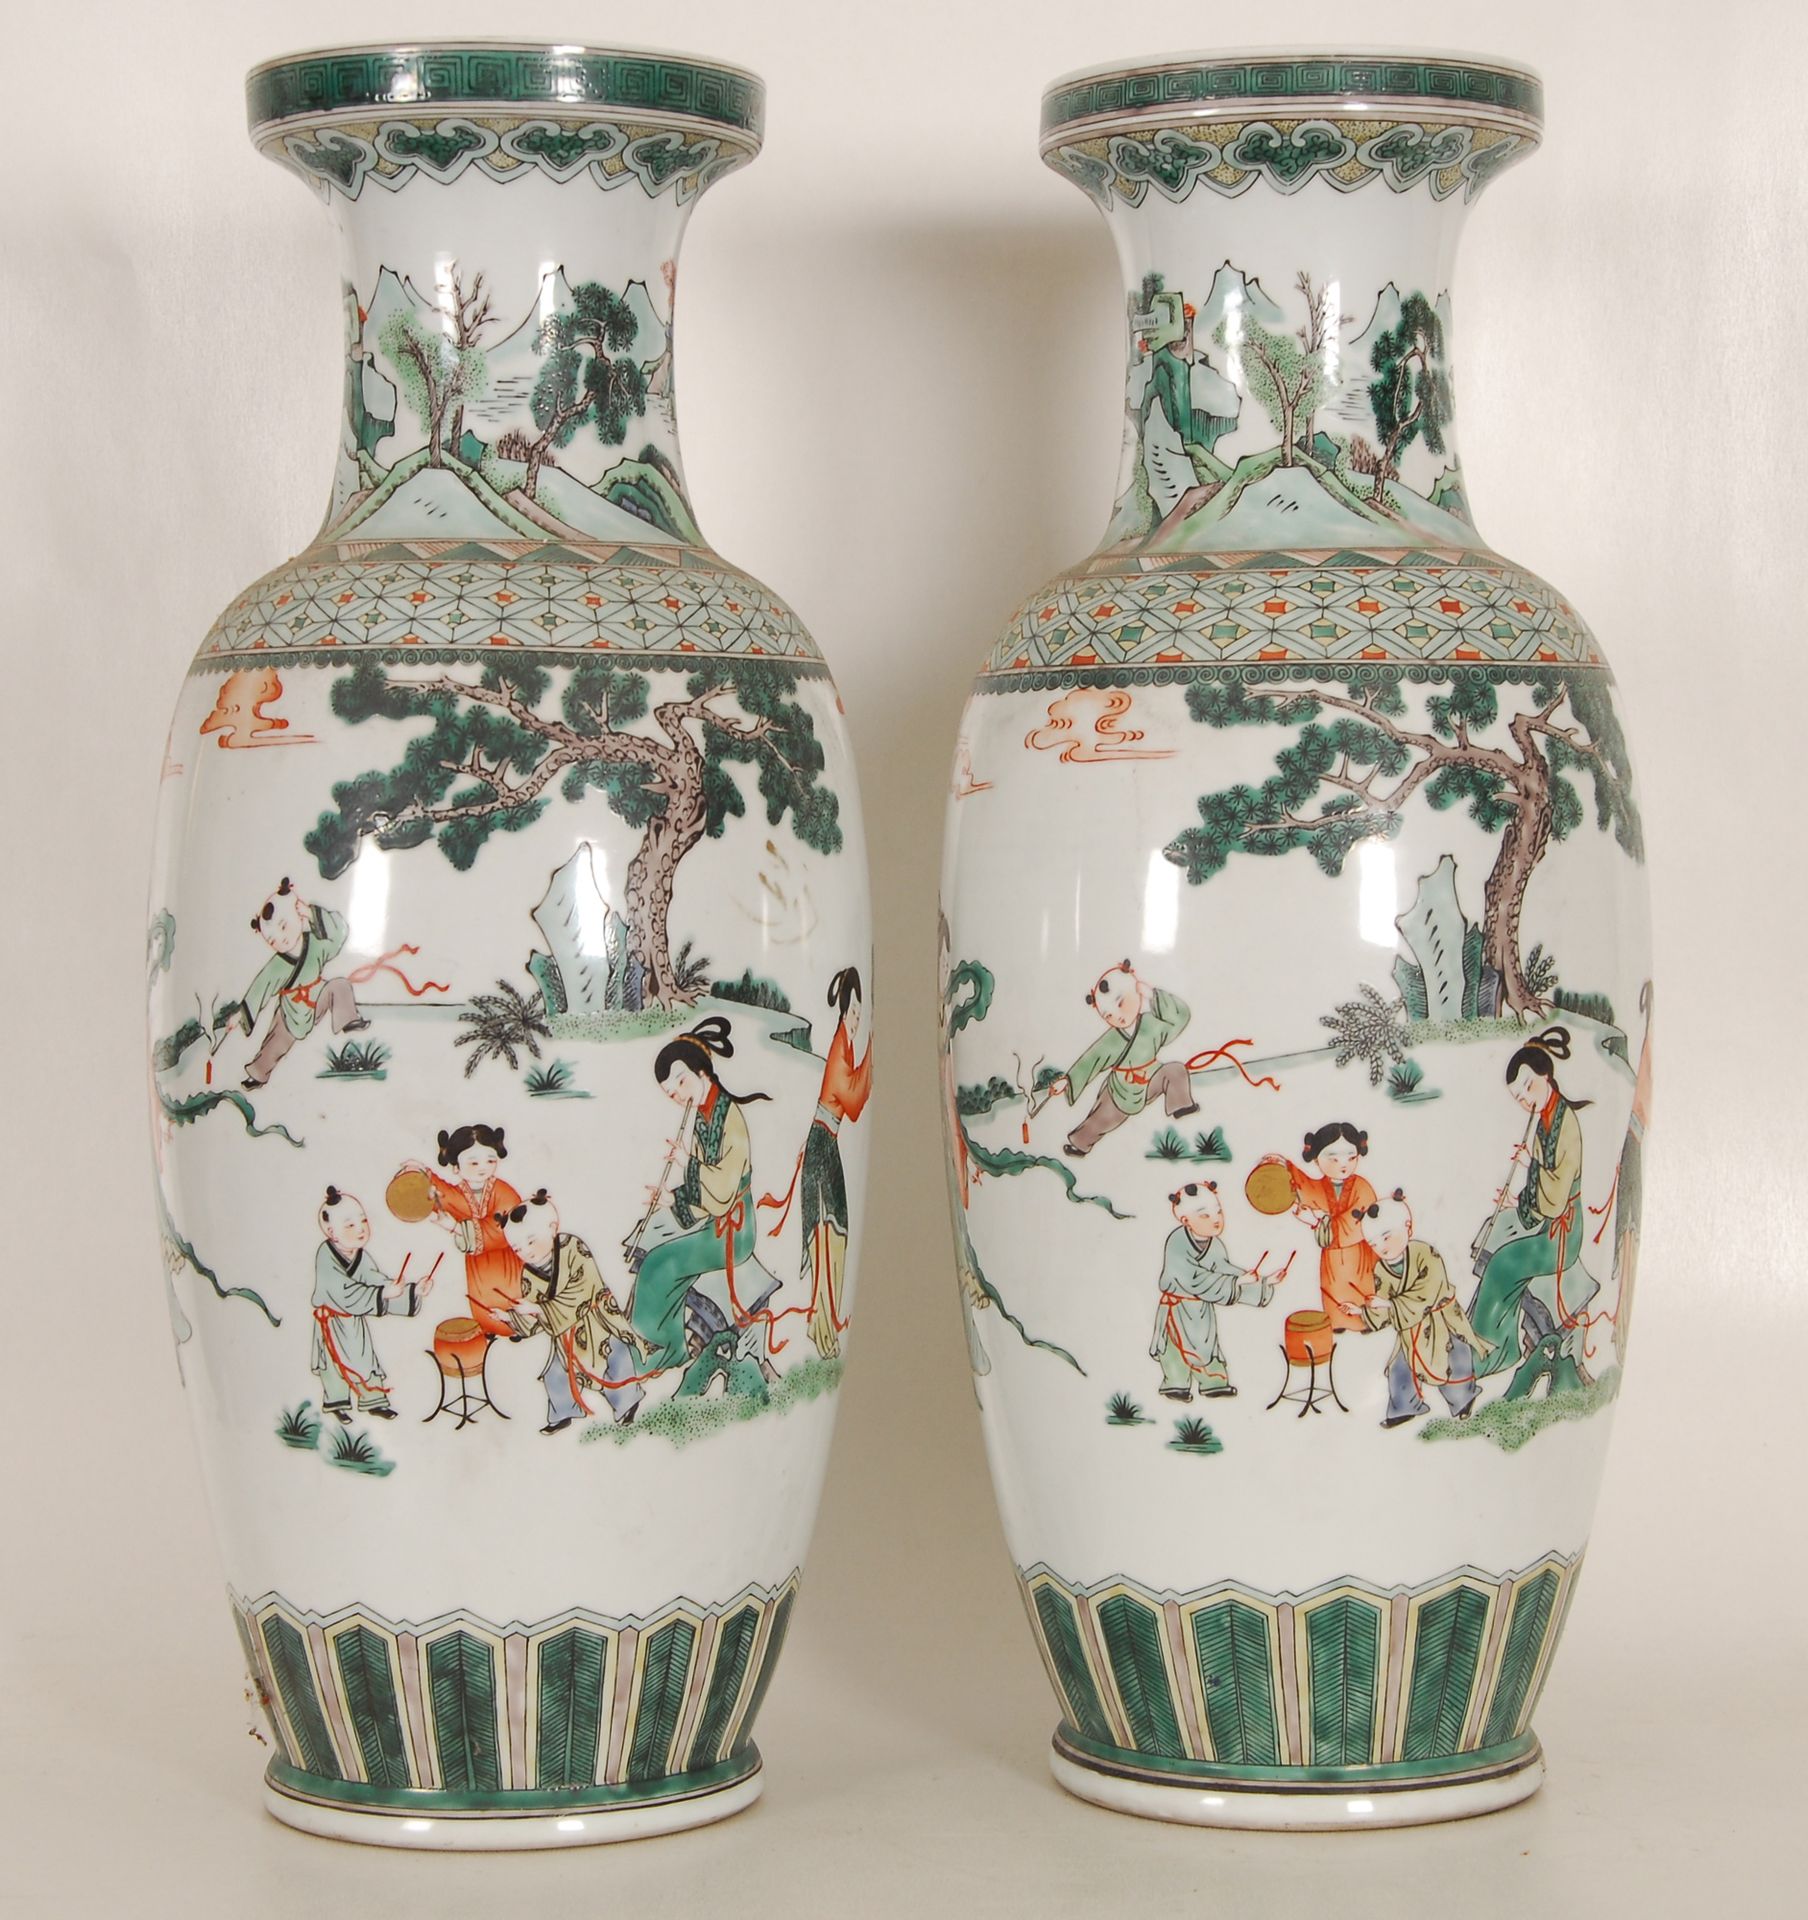 Chine A pair of famille verte vases
Decorated with women and children in a lands&hellip;